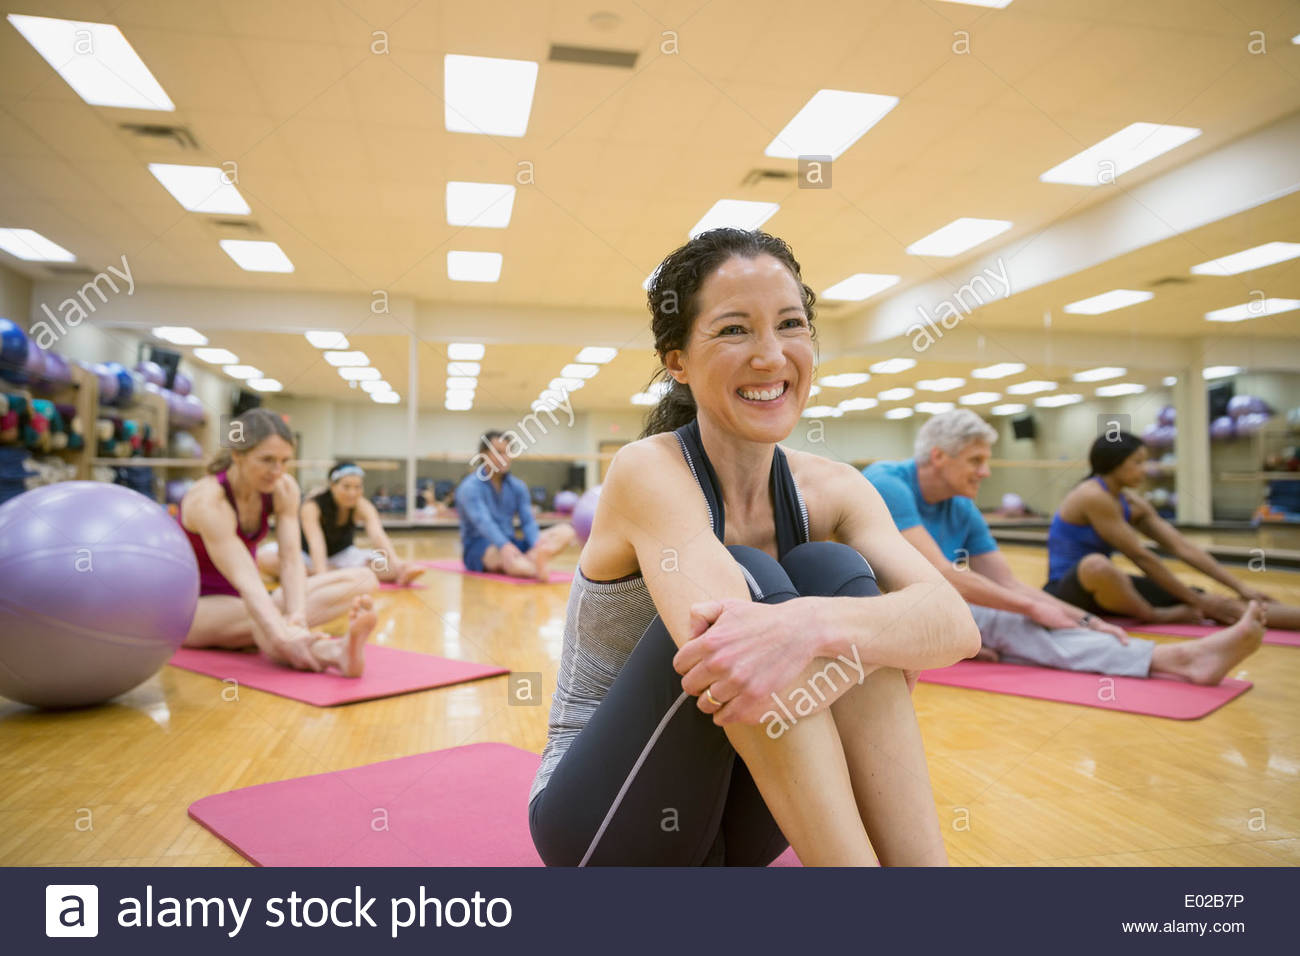 Smiling woman on yoga mat in exercise class Stock Photo